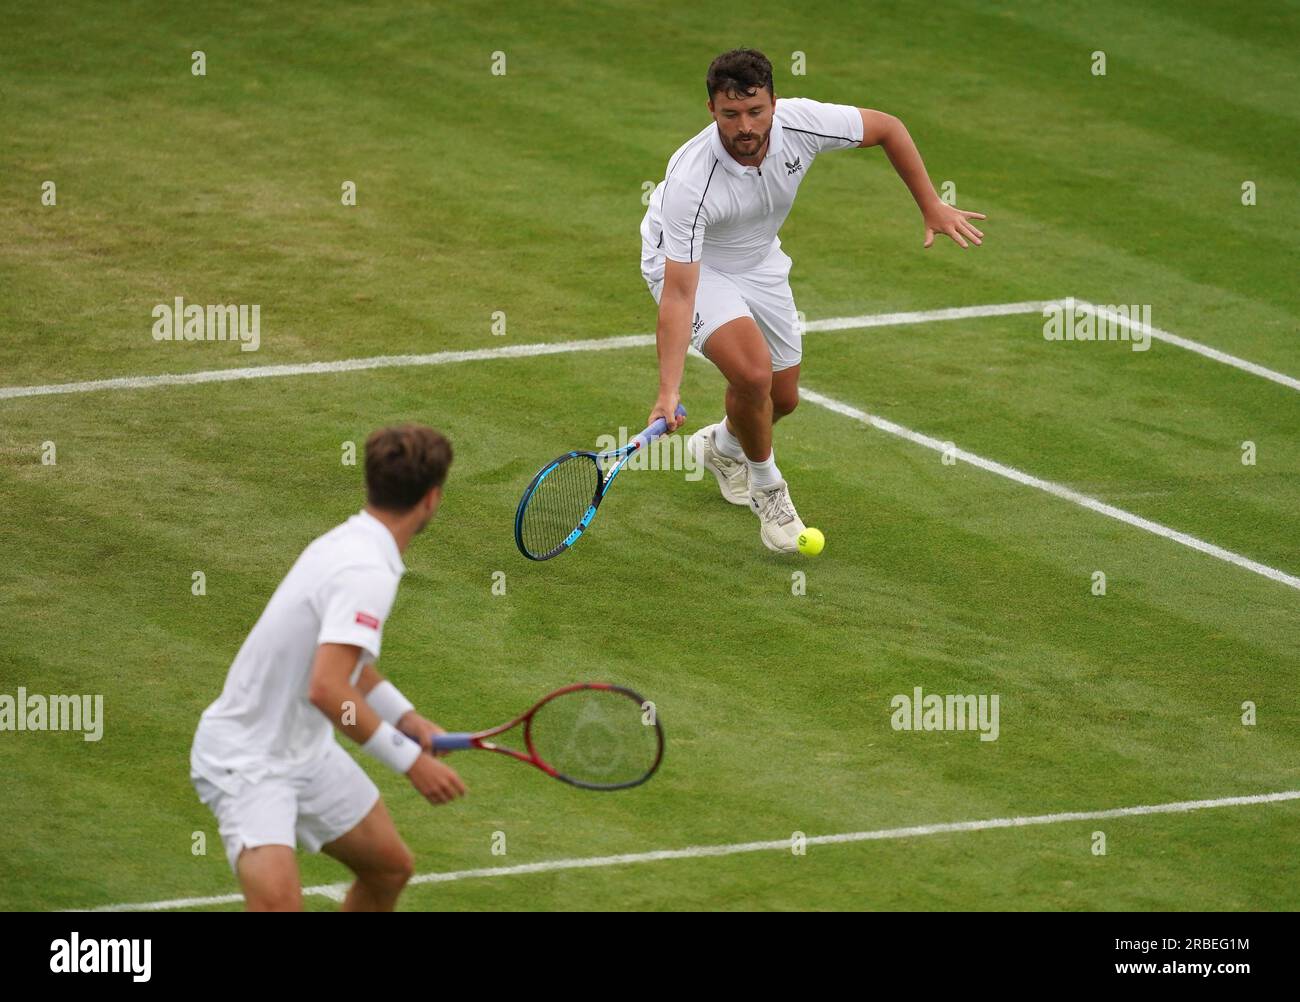 Liam Broady (left) and Jonny O'Mara (right) during their match against Rafael Matos and Francisco Cabral (not pictured) on day seven of the 2023 Wimbledon Championships at the All England Lawn Tennis and Croquet Club in Wimbledon. Picture date: Sunday July 9, 2023. Stock Photo